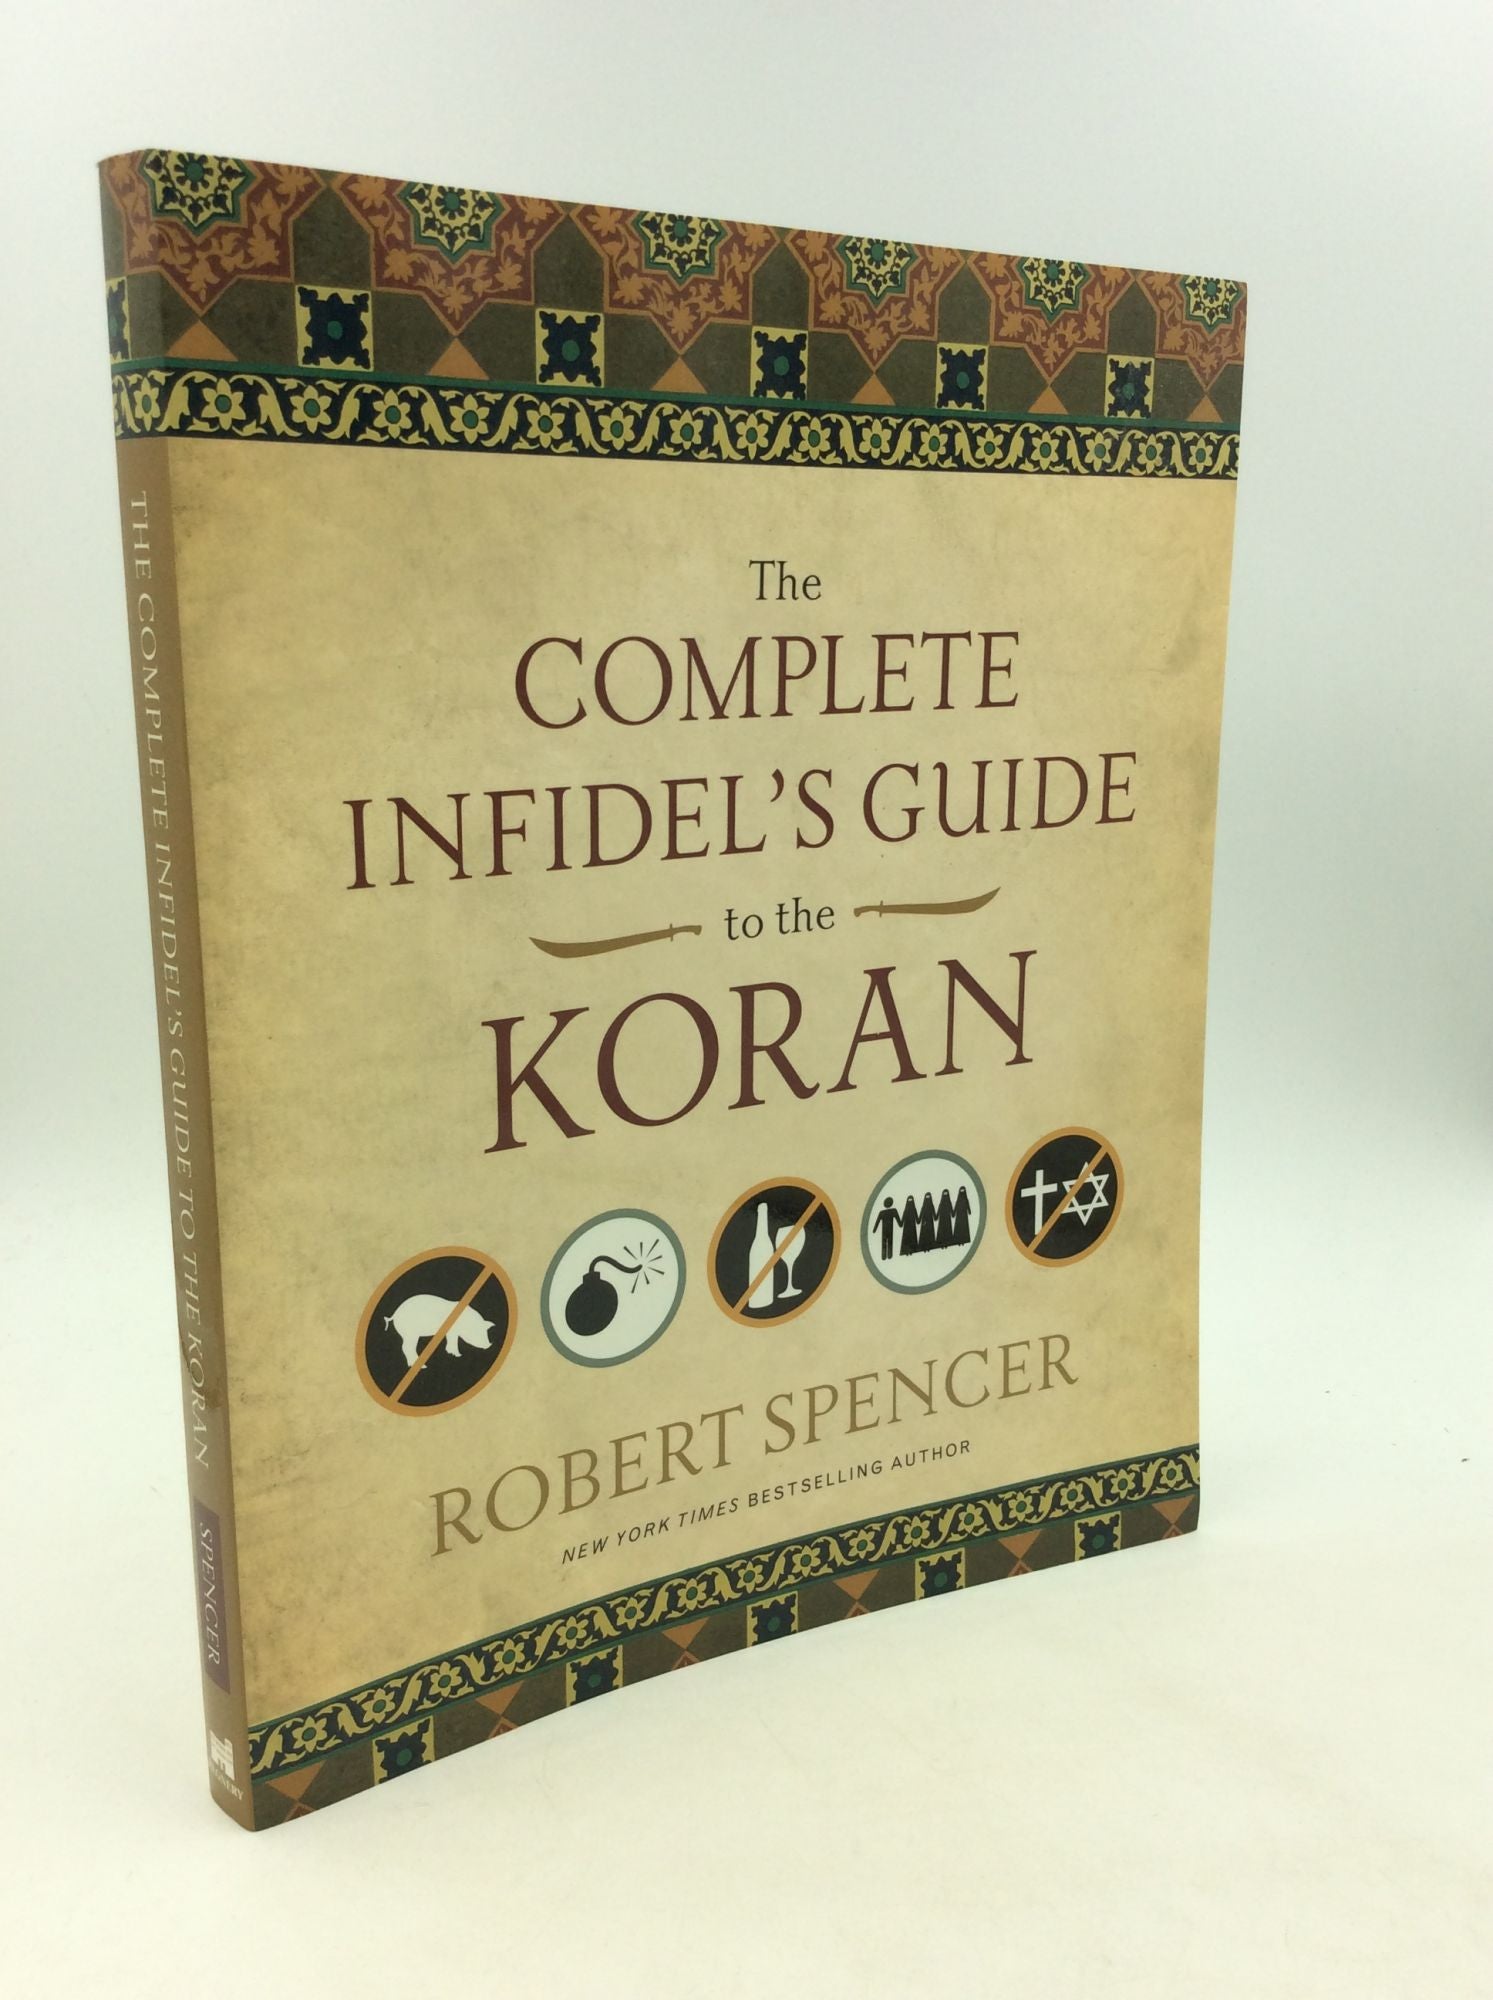 Robert Spencer - The Complete Infidel's Guide to the Koran